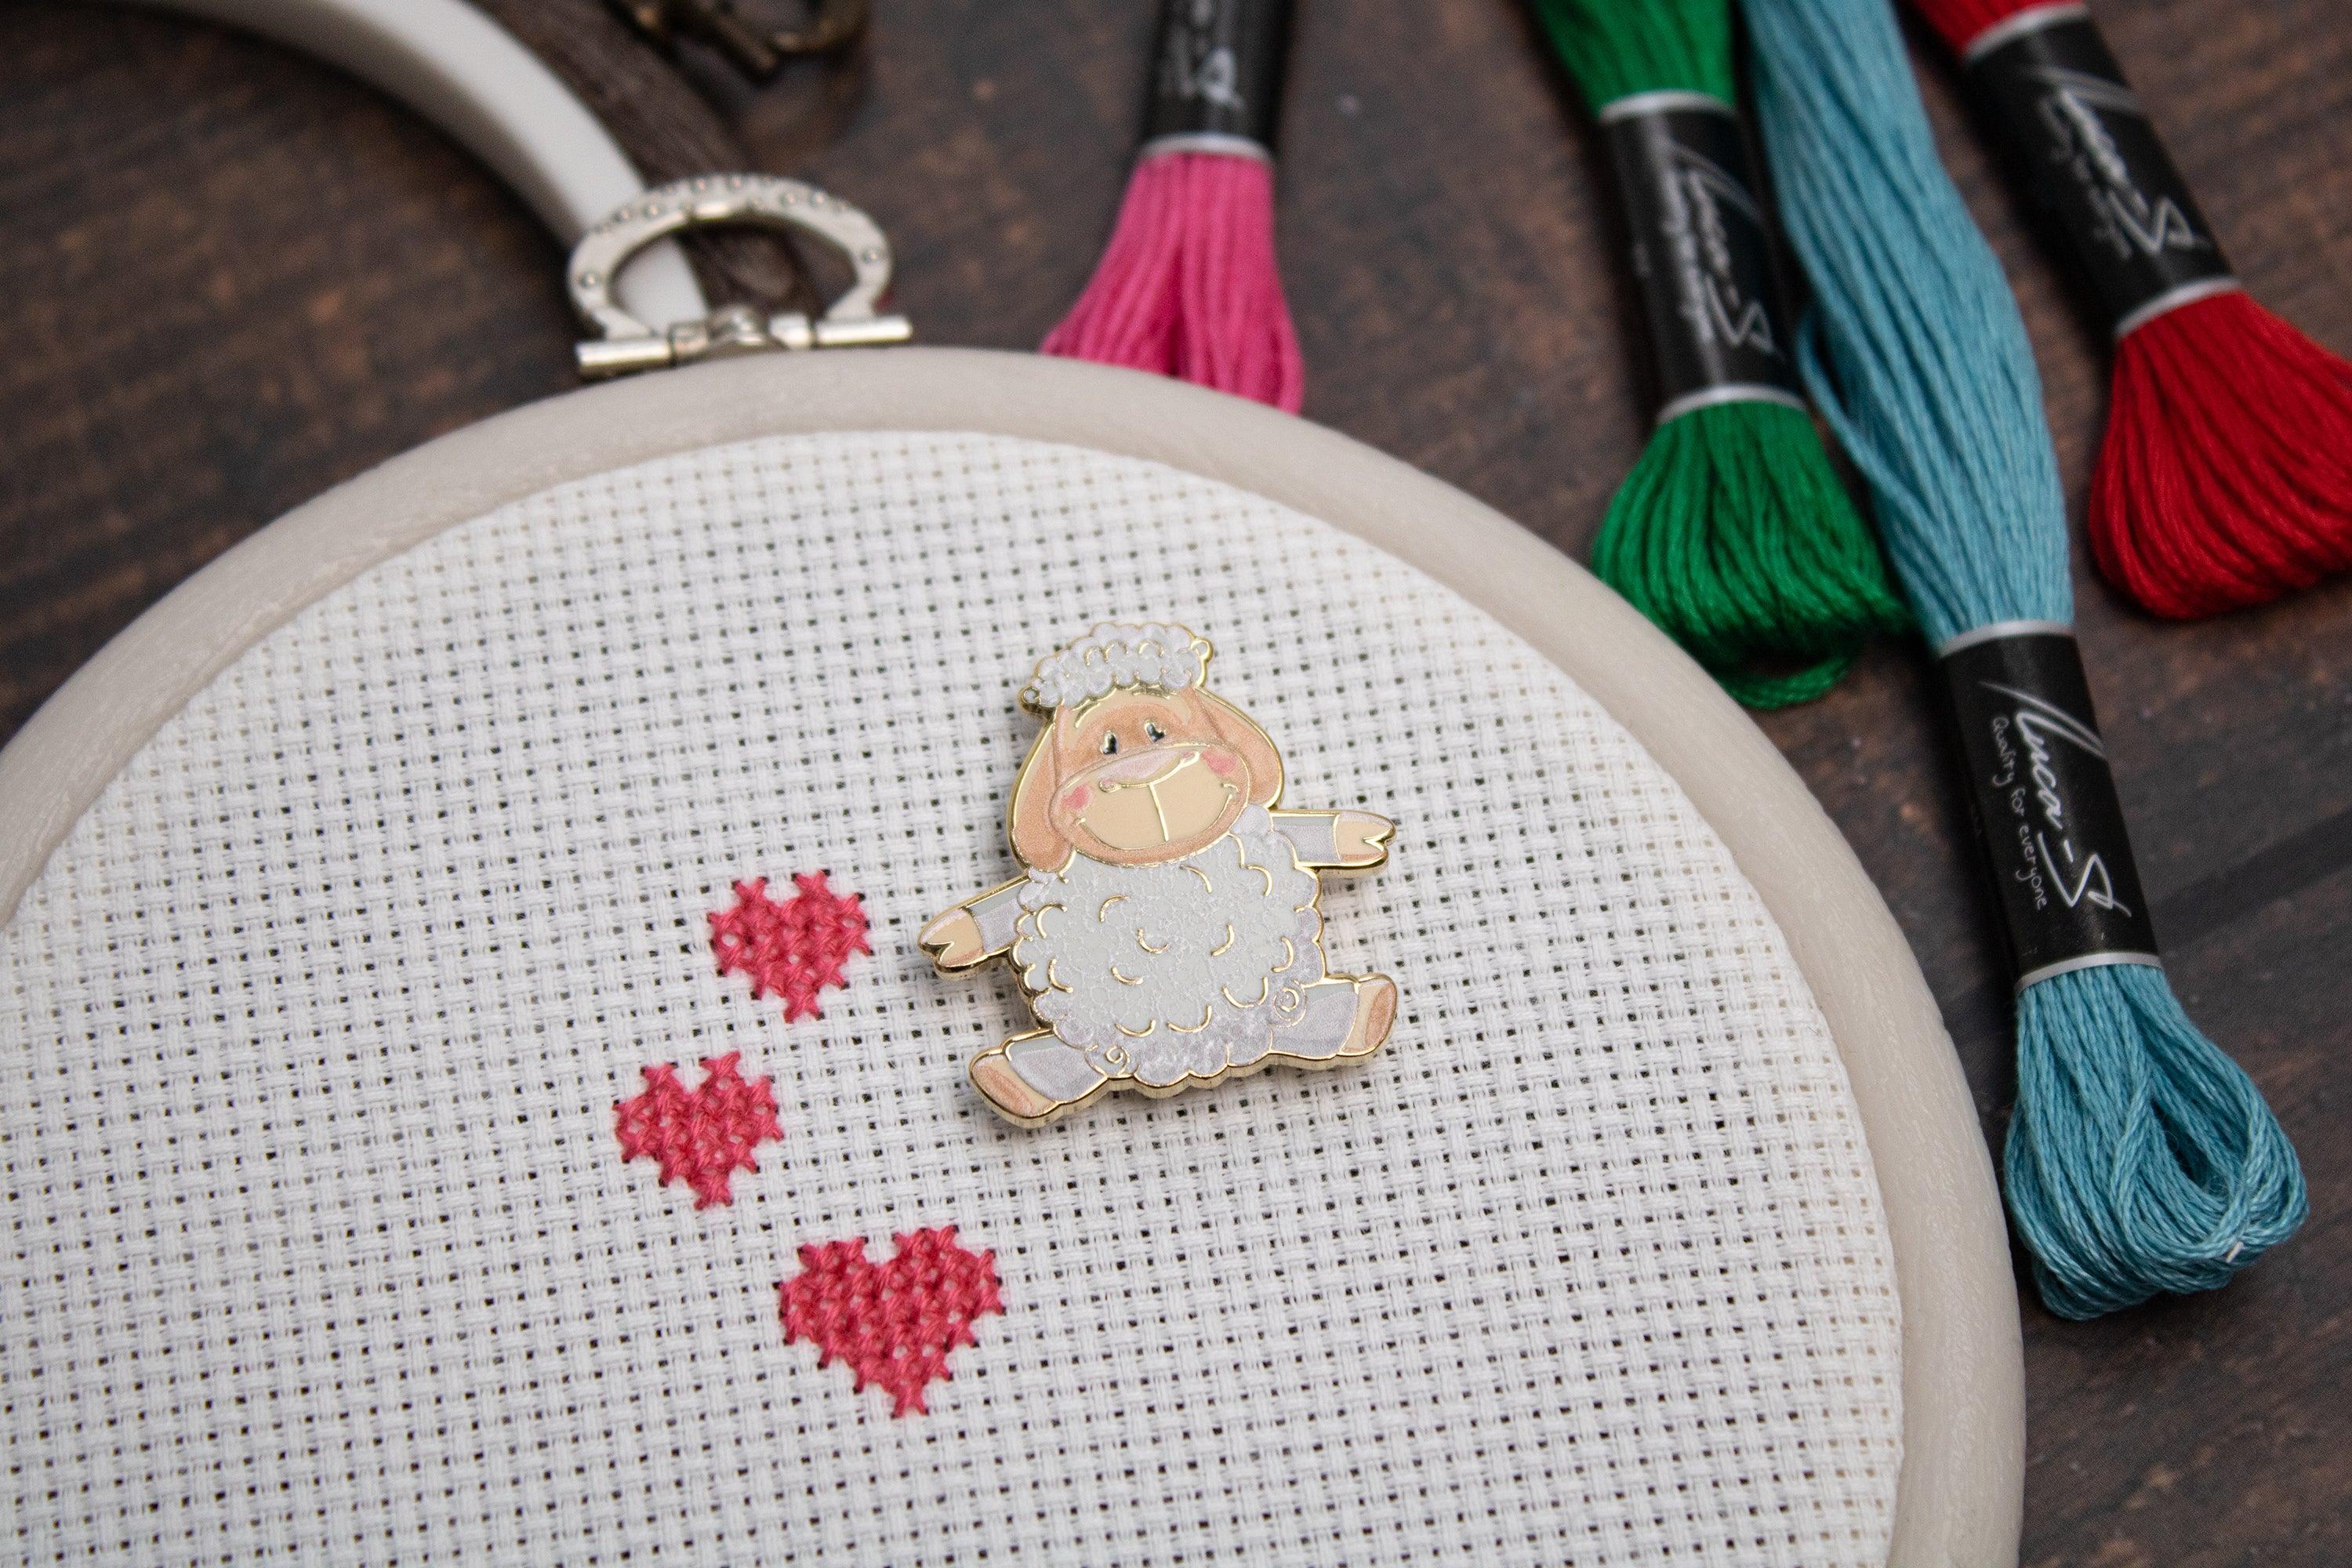 Tools for Cross Stitch. a Hoop for Embroidery and Canvas on White Stock  Image - Image of canvas, sewing: 135888505